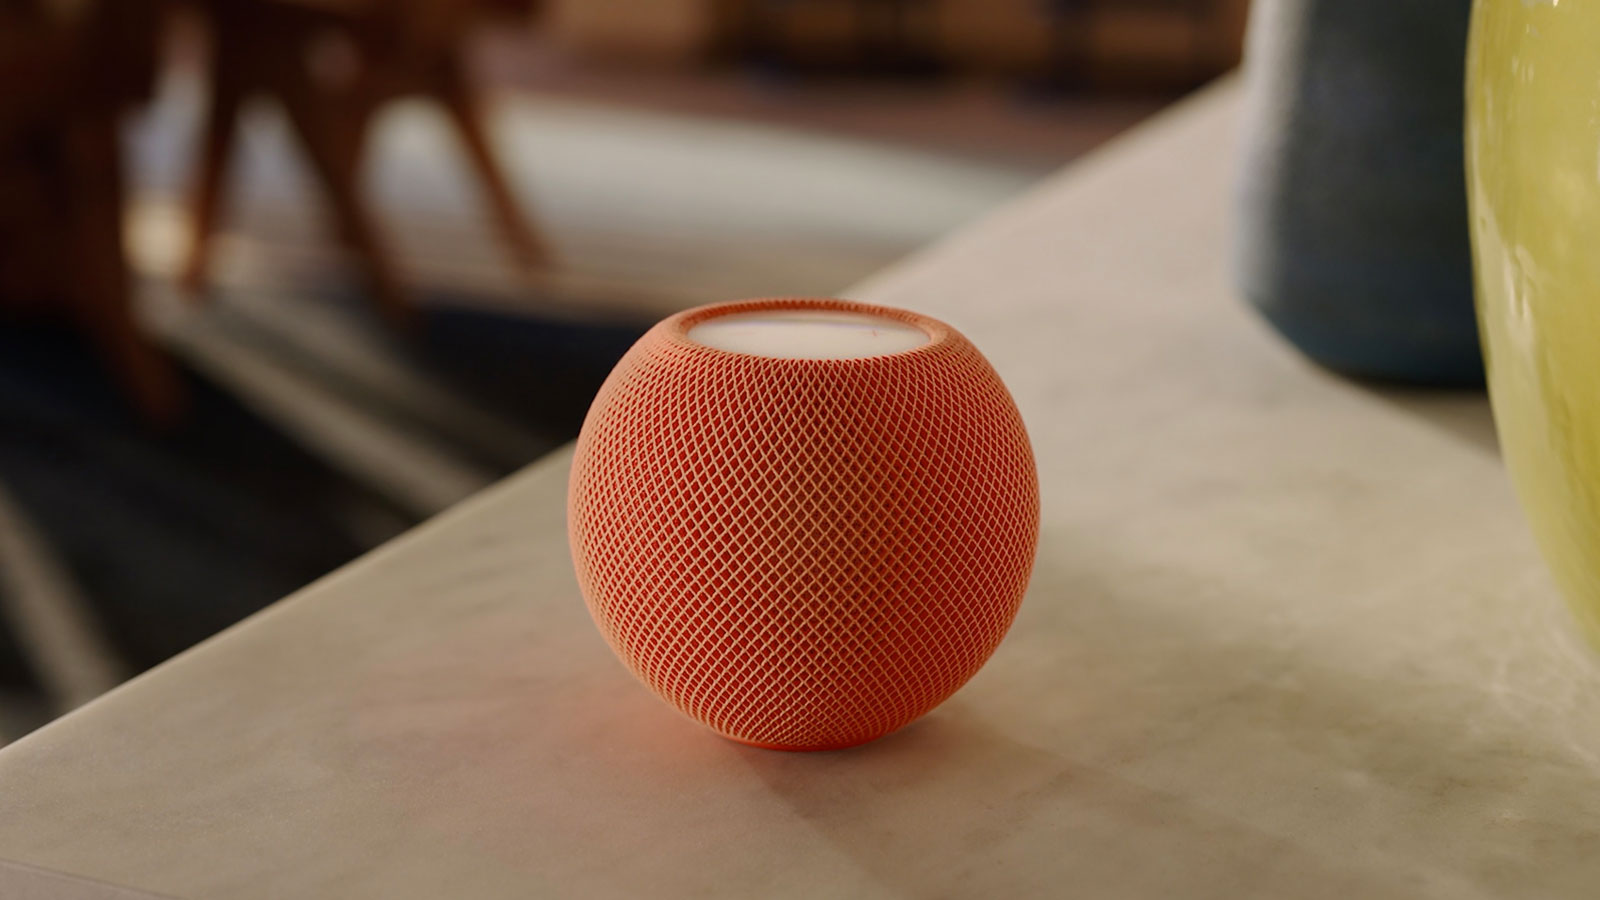 homepod mini by Apple and other reveals